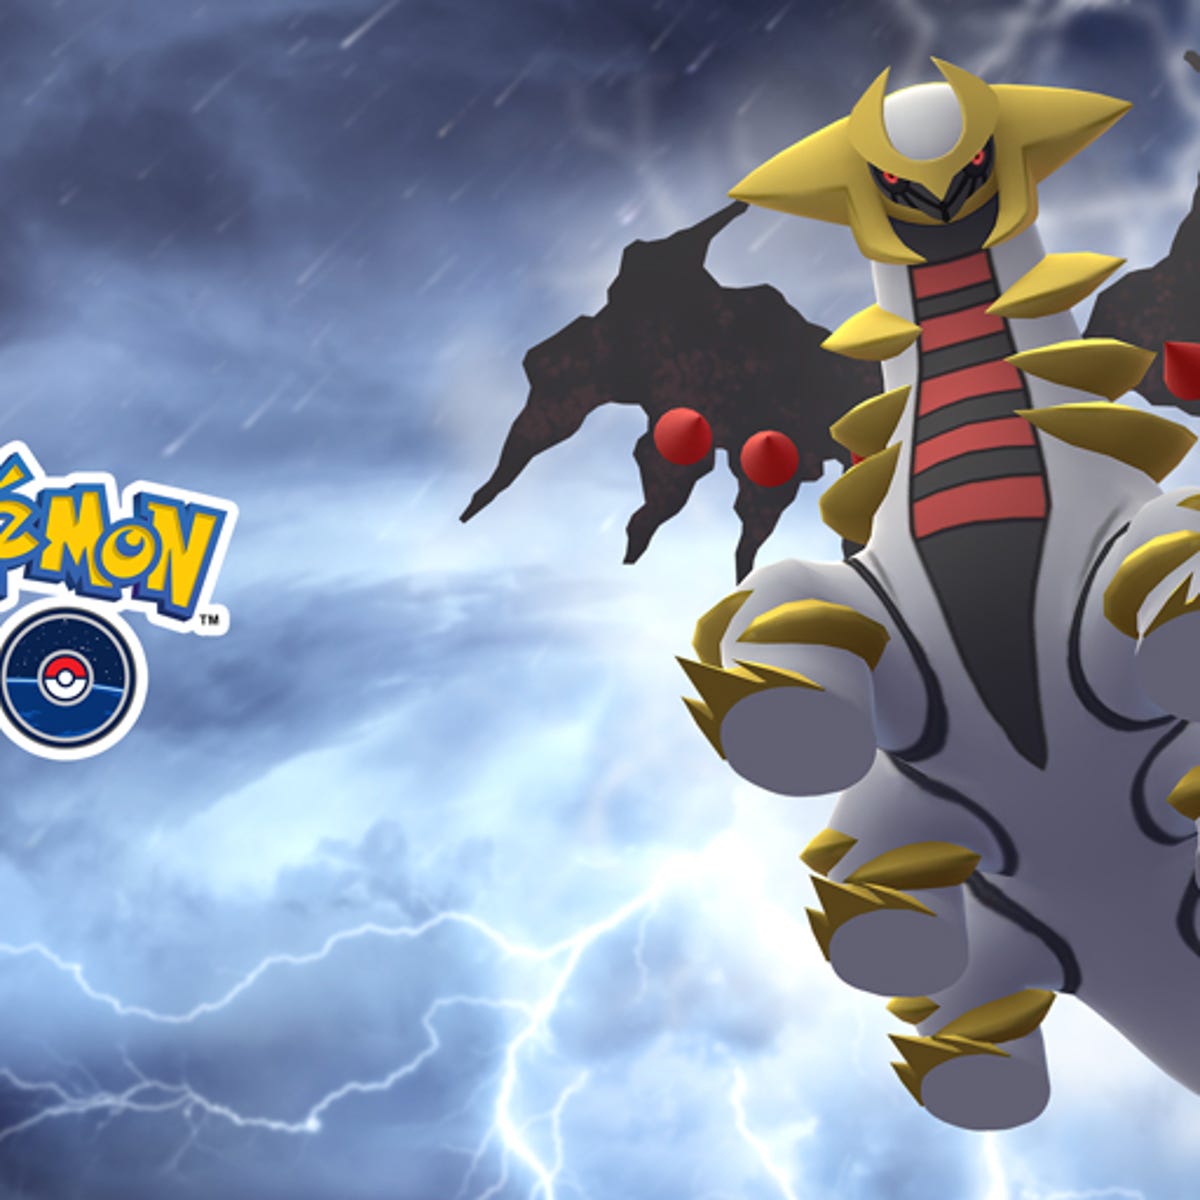 Why is nobody talking about Giratina!? (Great new Pokémon Card!) 